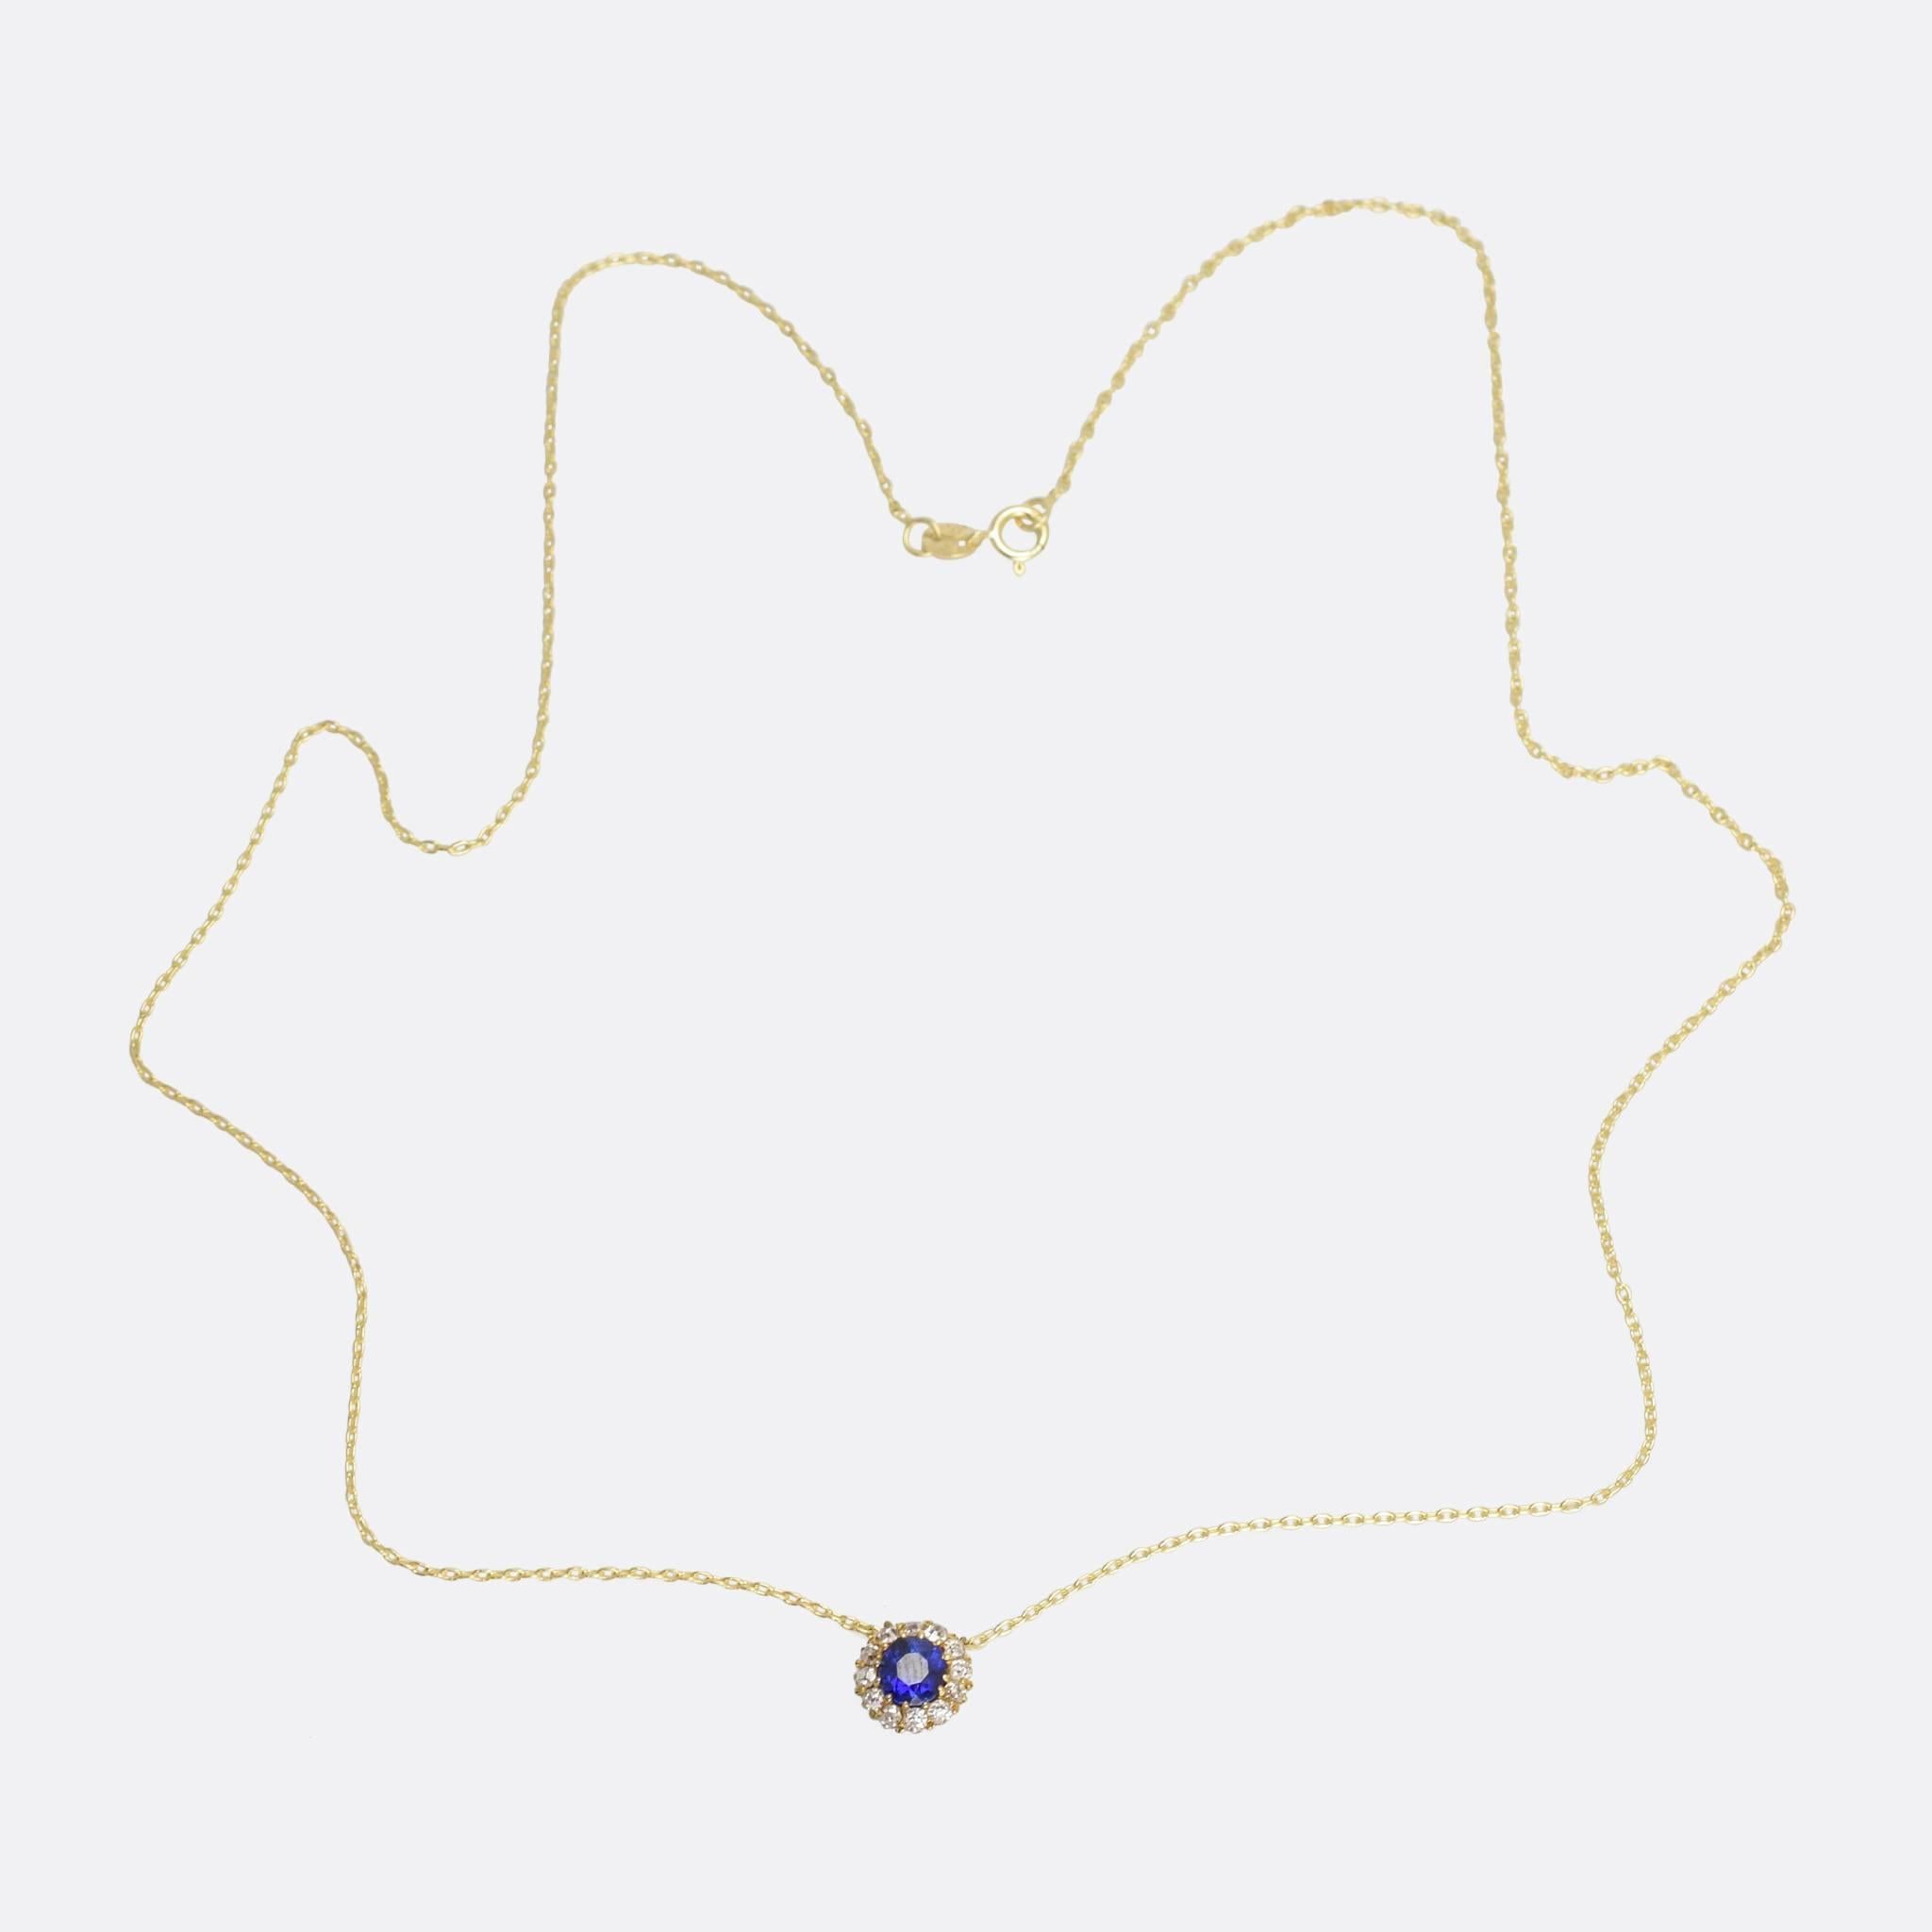 A beautiful antique sapphire and diamond cluster pendant, converted from a stick pin. The stones are mounted in elegant claw settings, and the piece measures 8.5mm in diameter. We've added a fine 9k gold chain.

STONES
Natural Blue Sapphire
Old